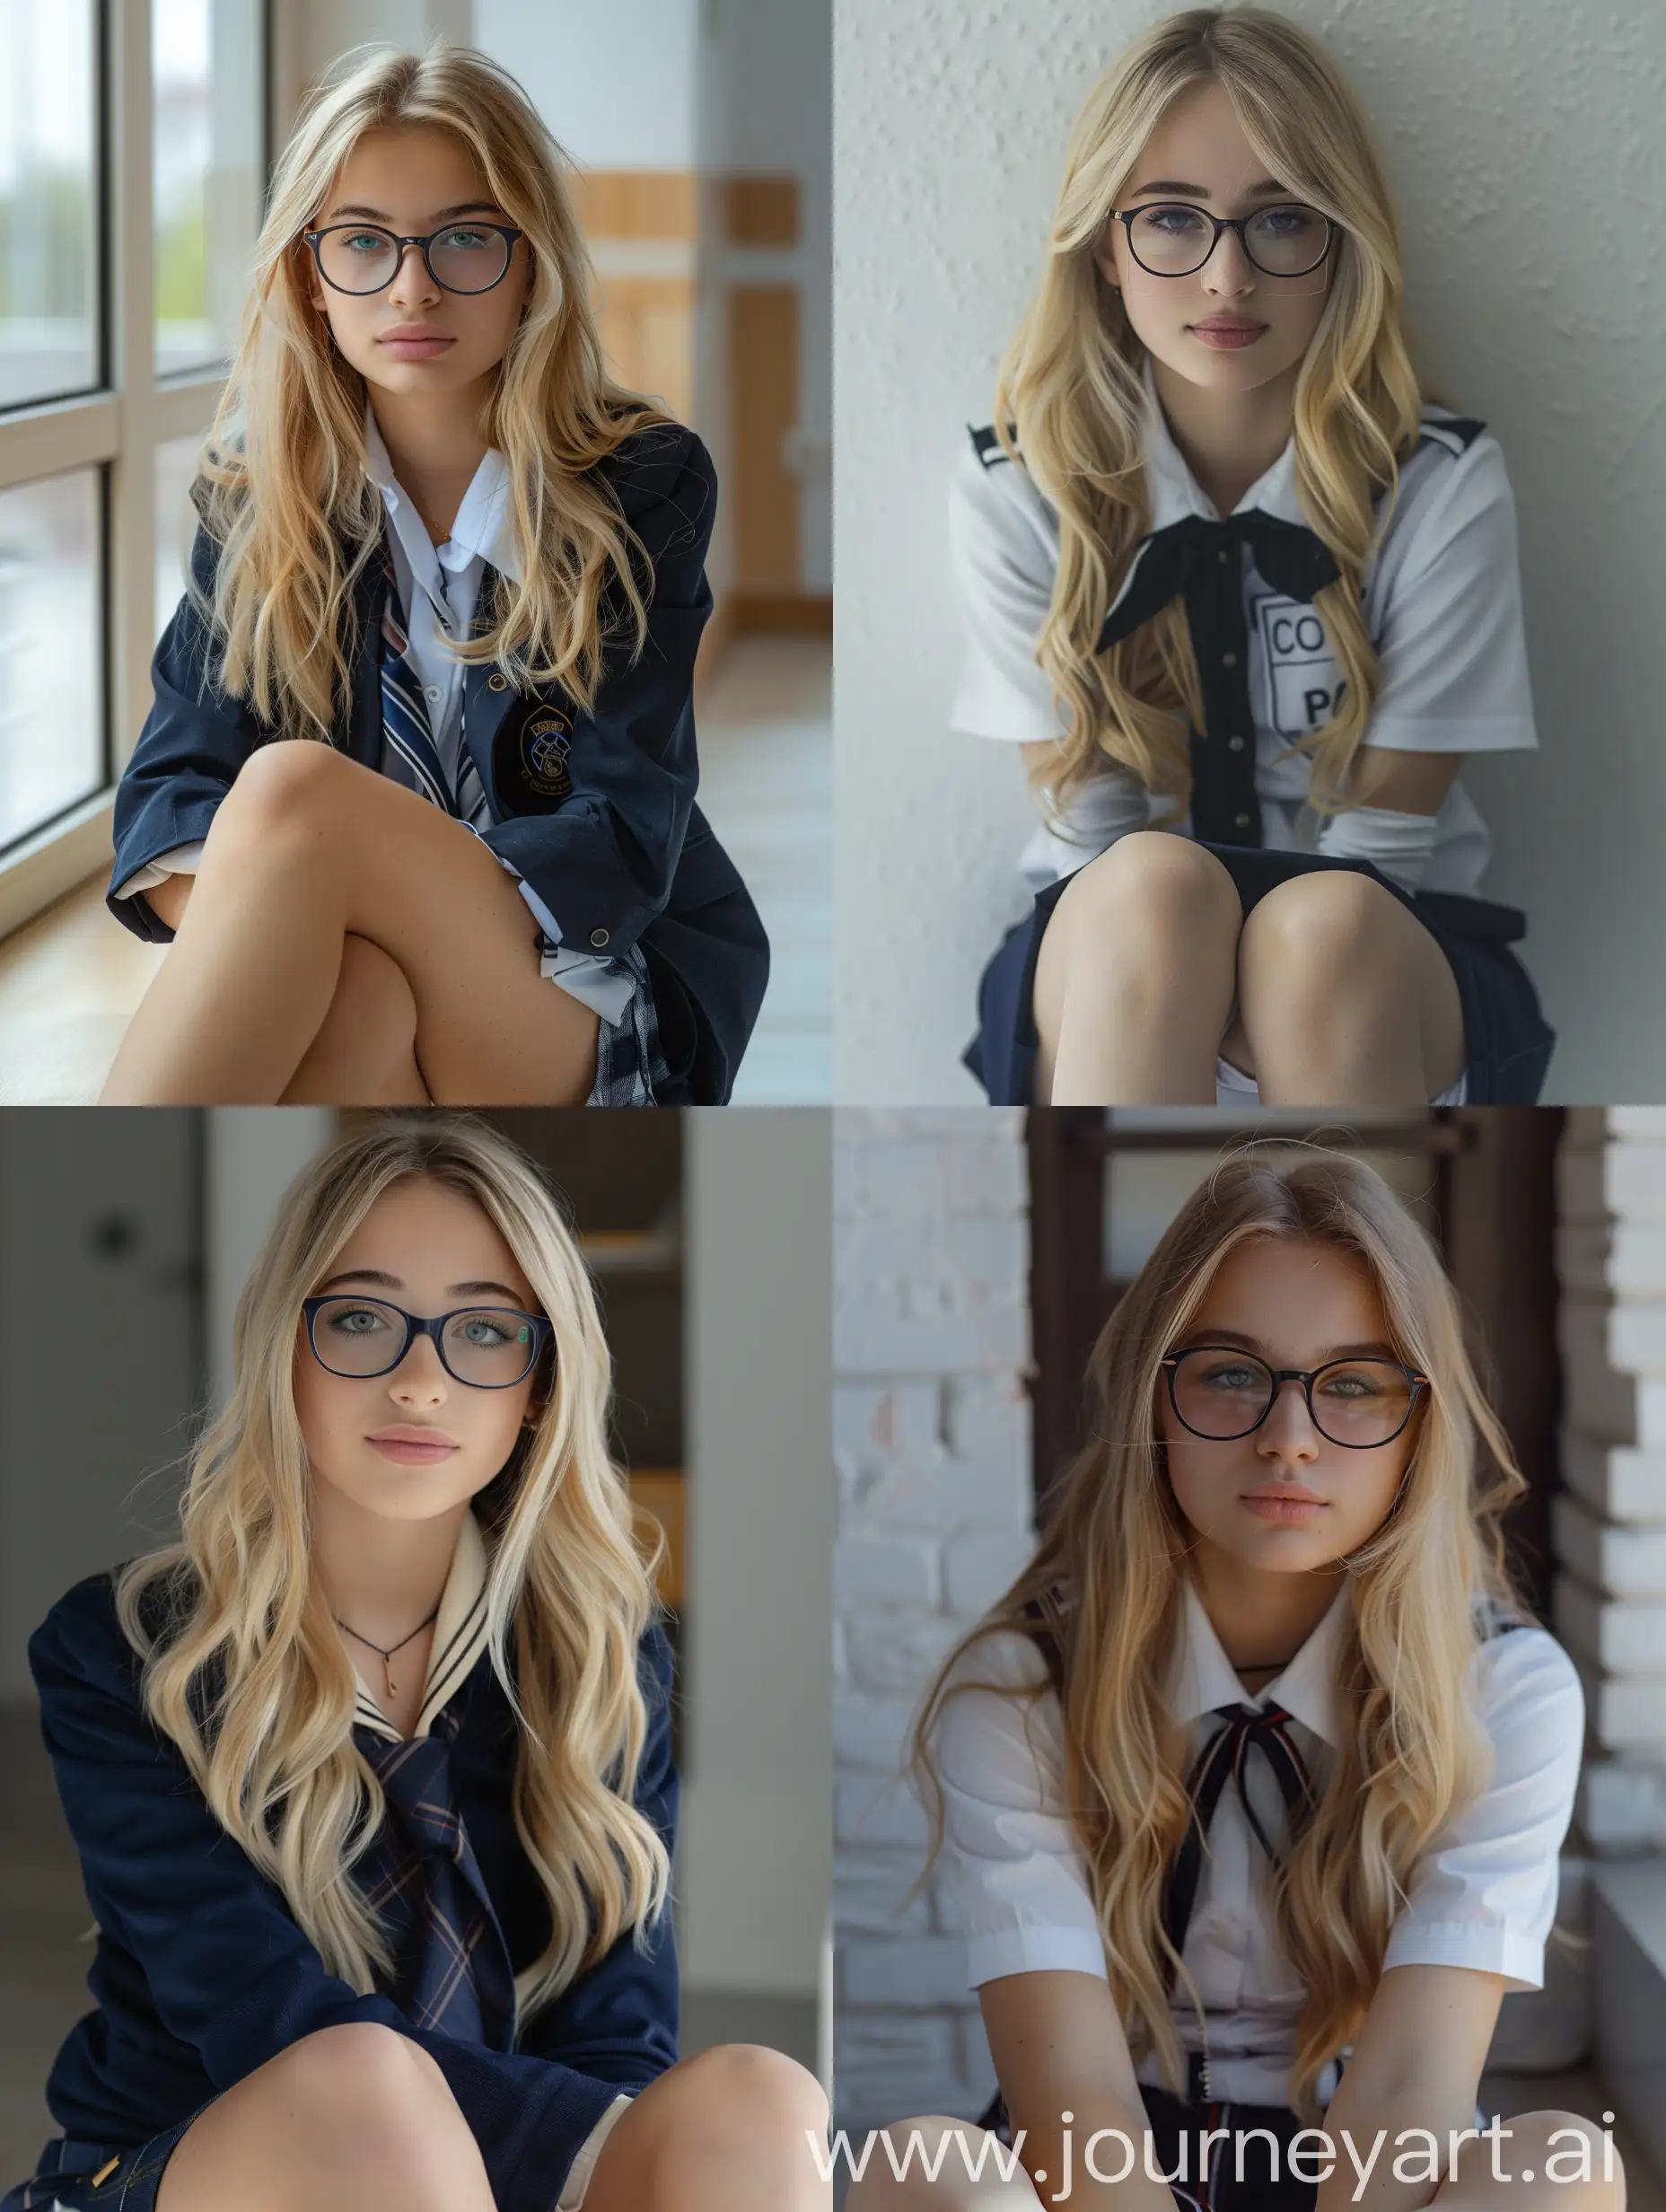 full shot of a woman, glasses, ,crossed legs, makeup, 18 years old, sitting, wearing school uniform, at school, blonde hair, beauty, down view, natural , no effects, fitness